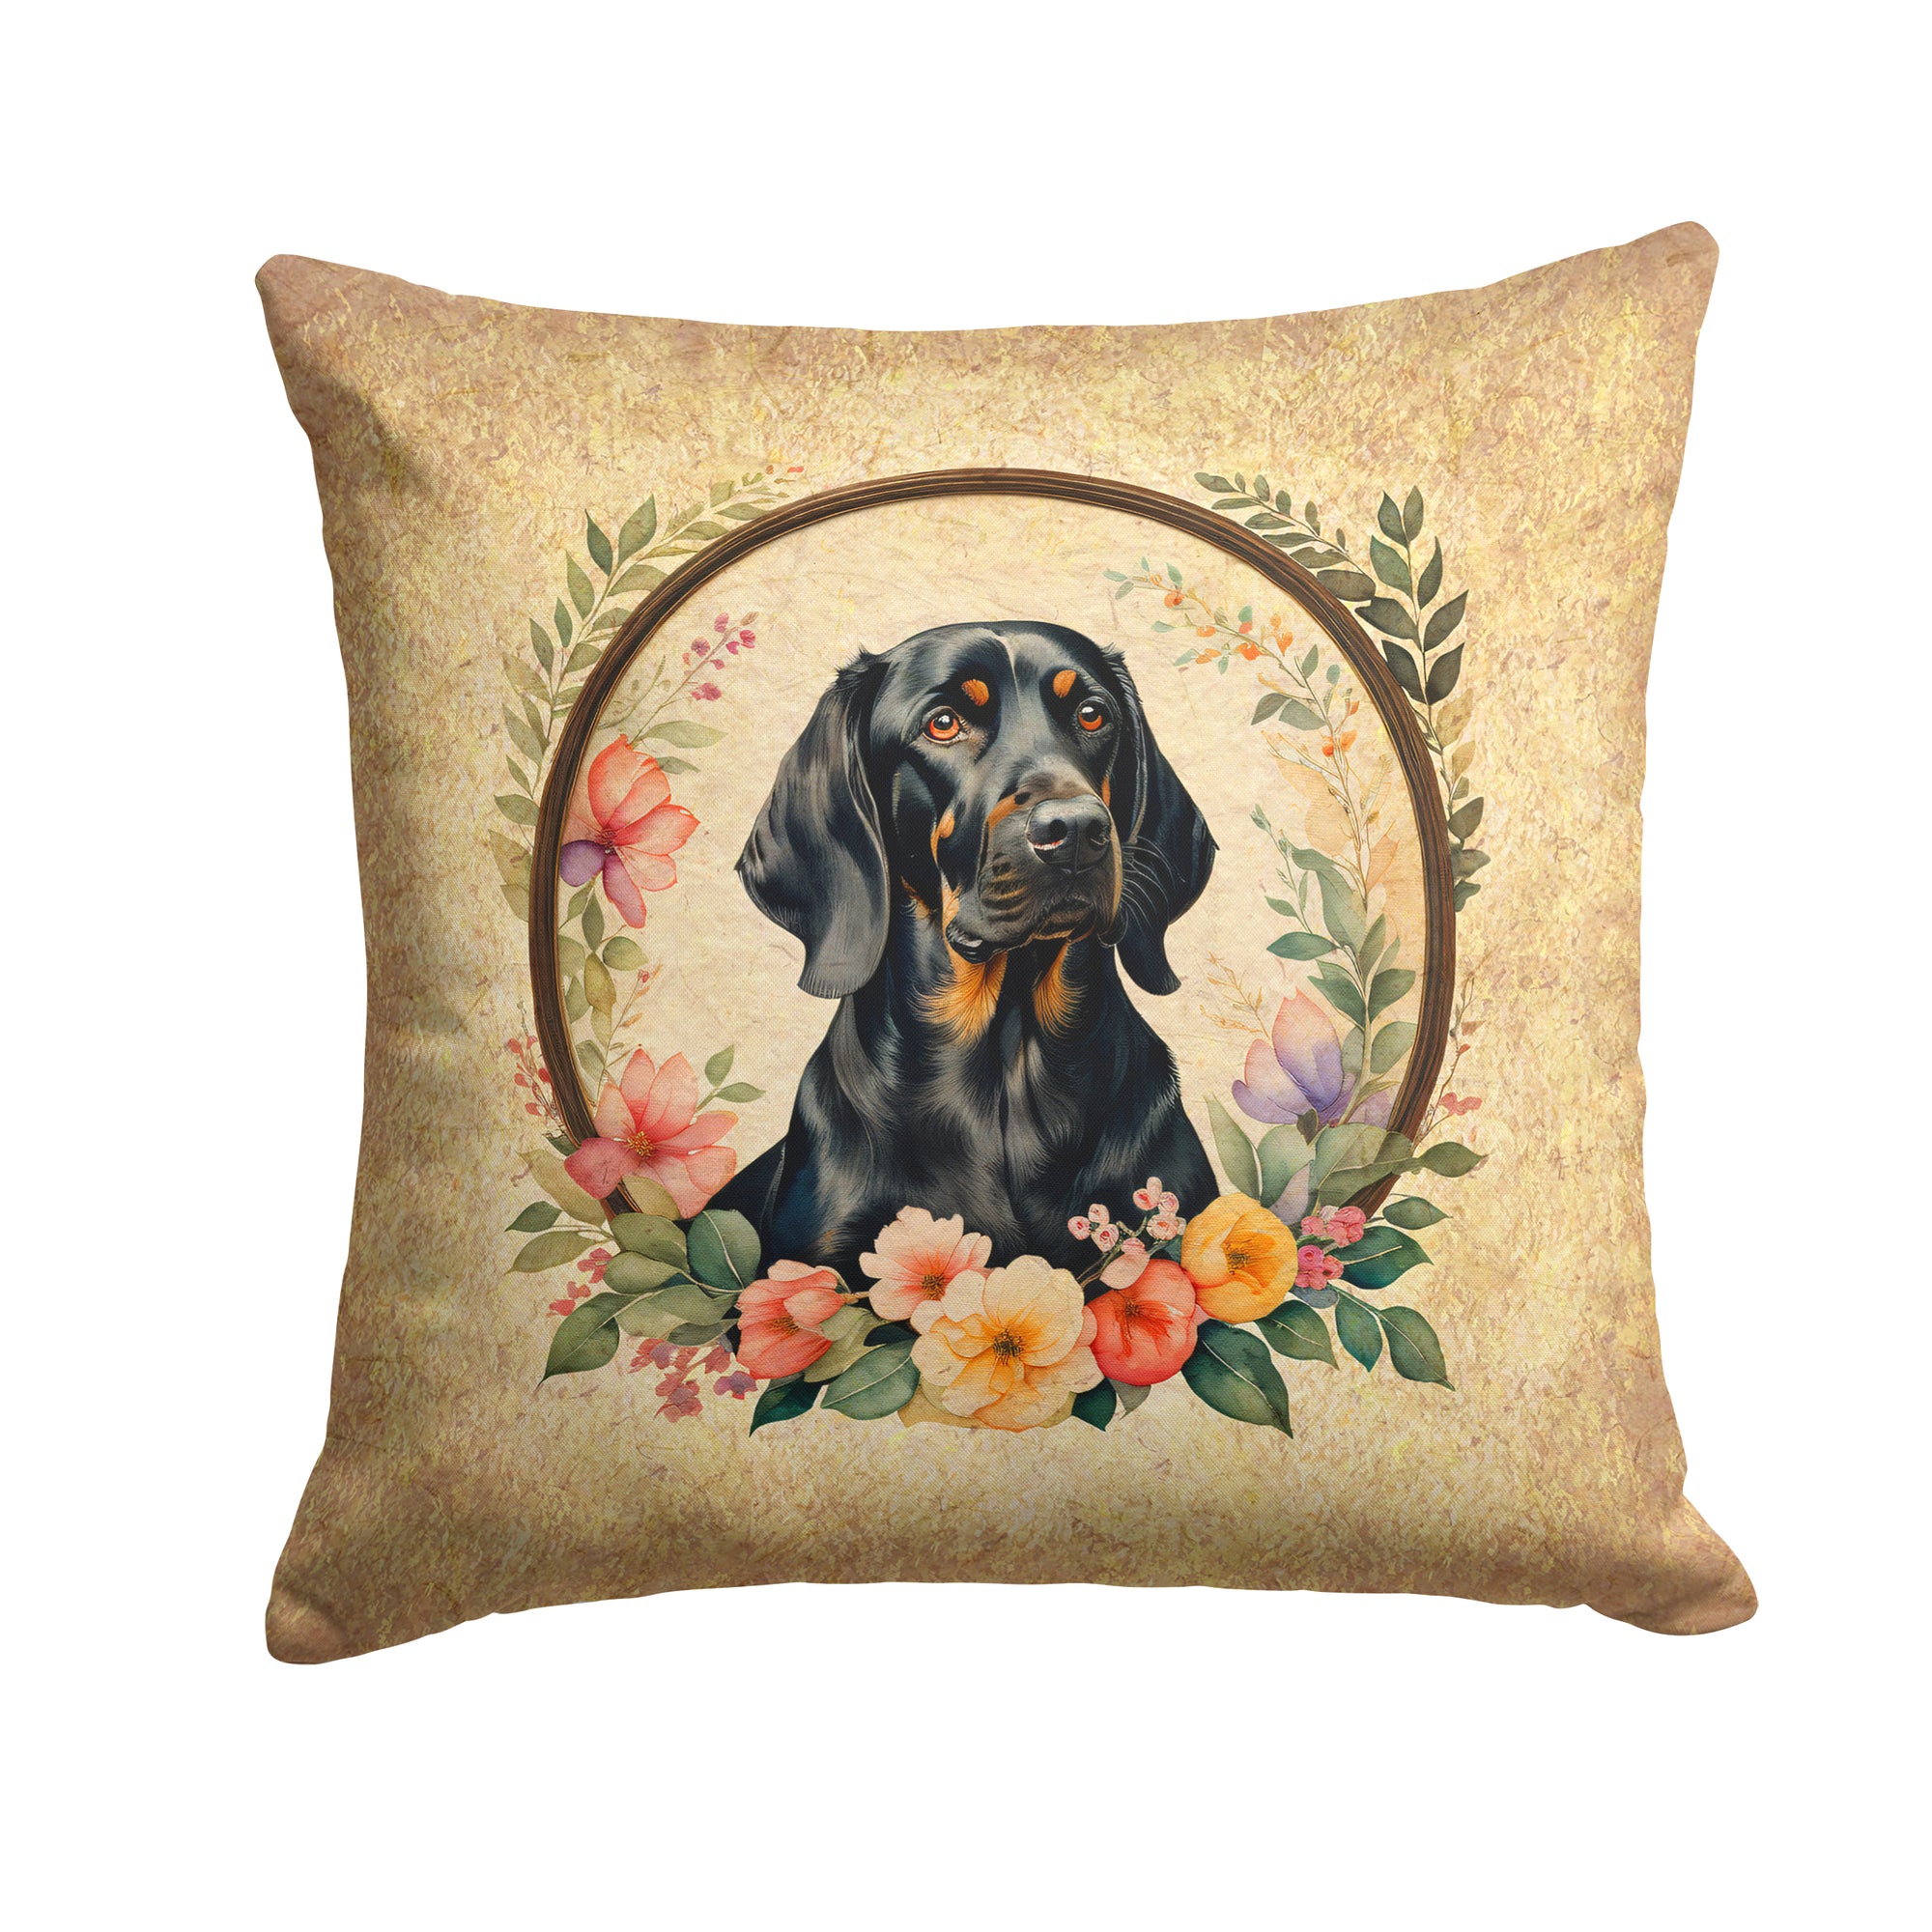 Buy this Black and Tan Coonhound and Flowers Fabric Decorative Pillow